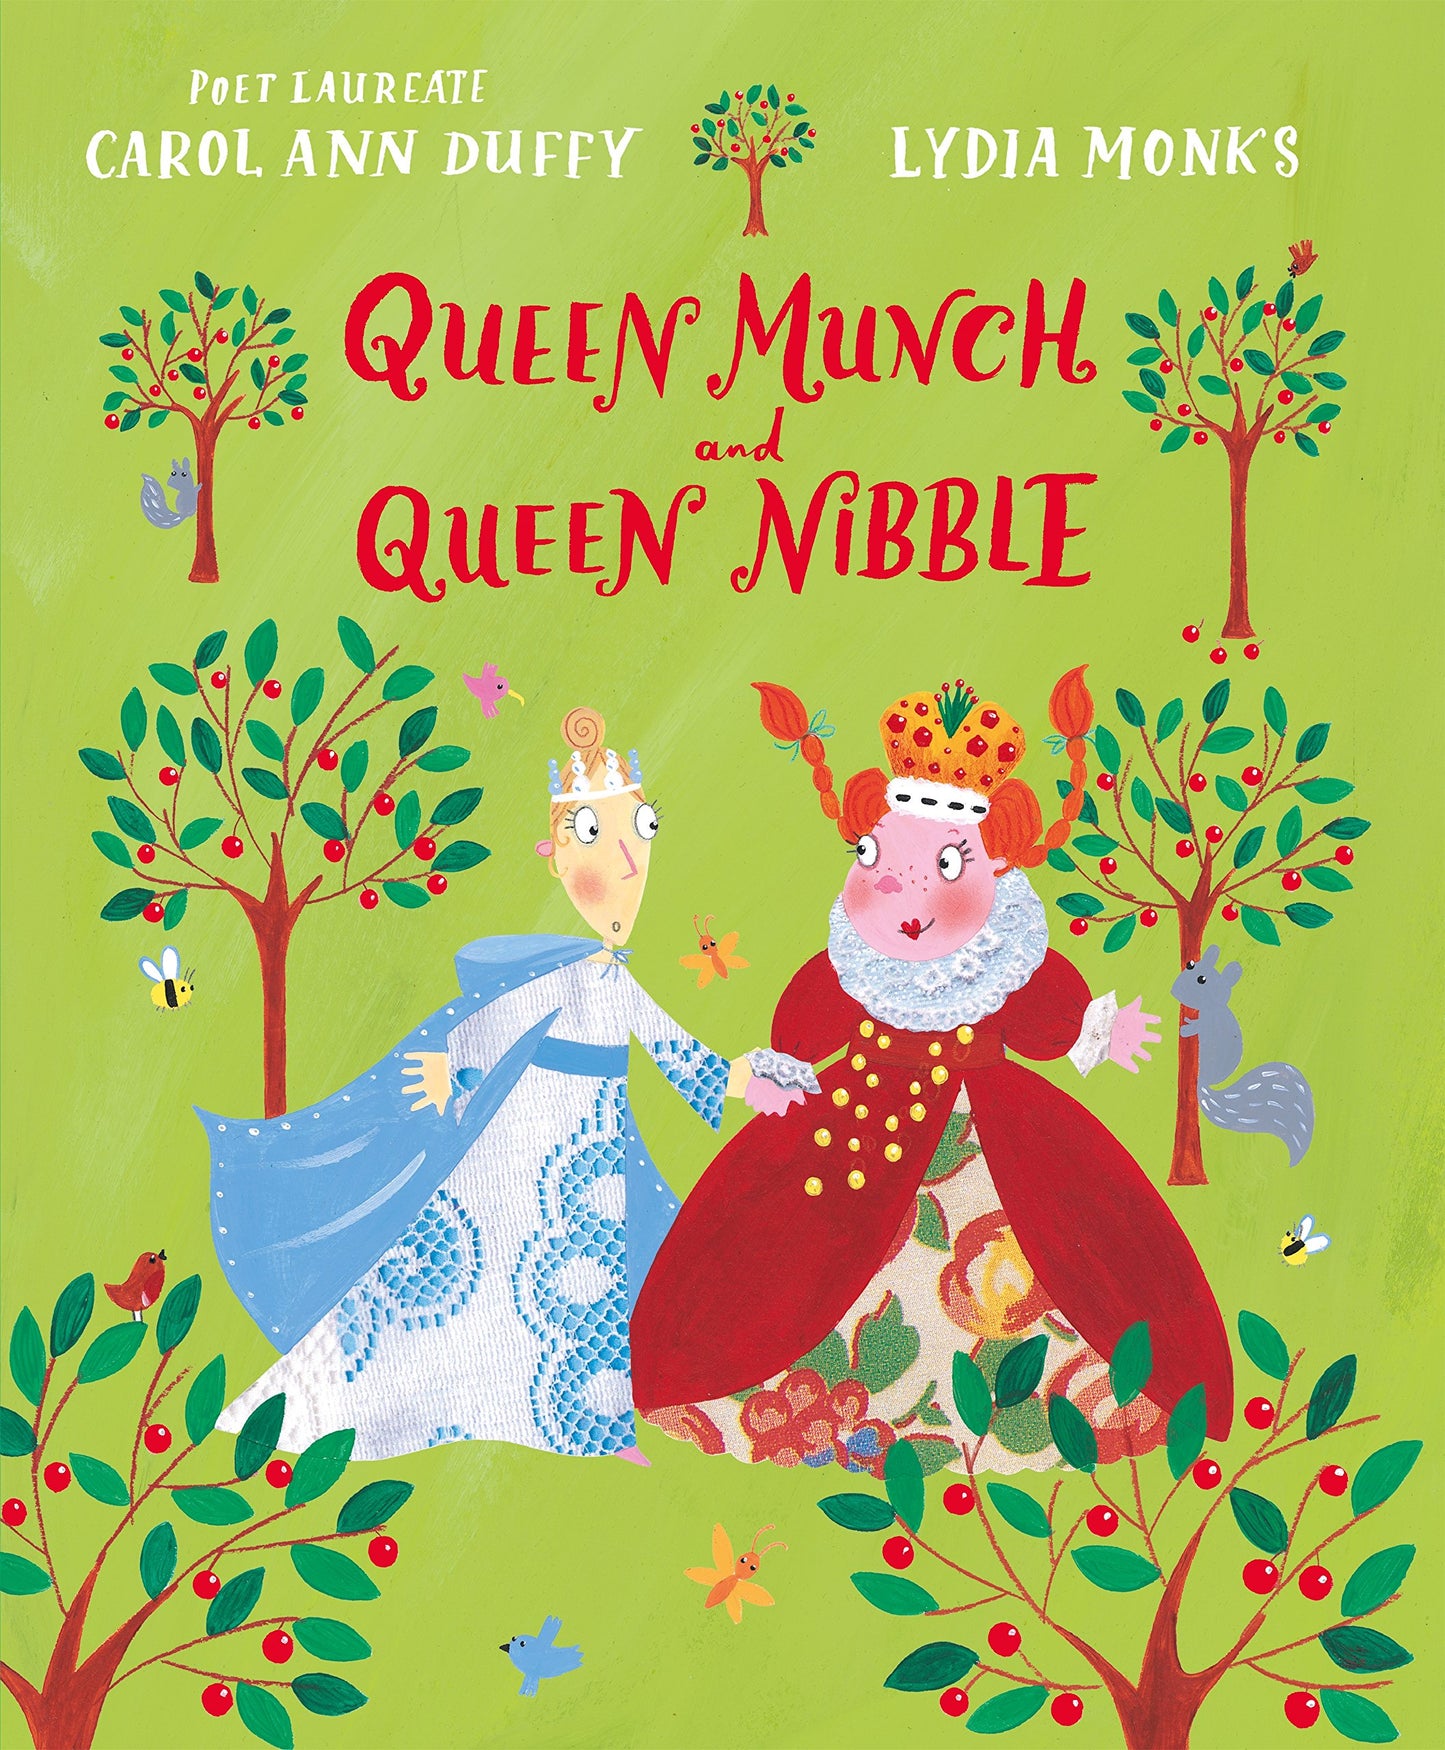 Queen Munch and Queen Nibble by Carol Ann Duffy and Lydia Monks